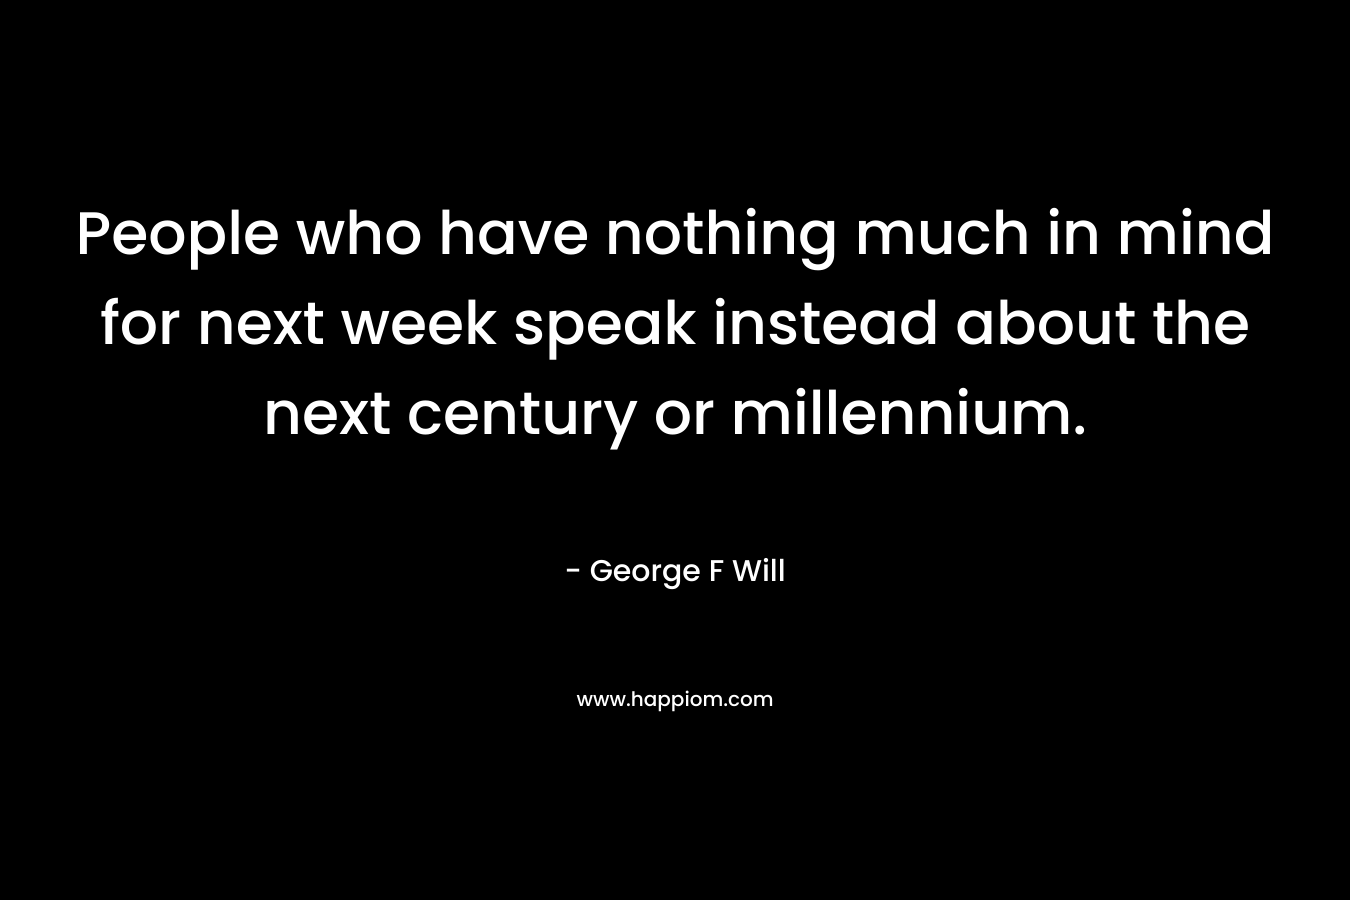 People who have nothing much in mind for next week speak instead about the next century or millennium.